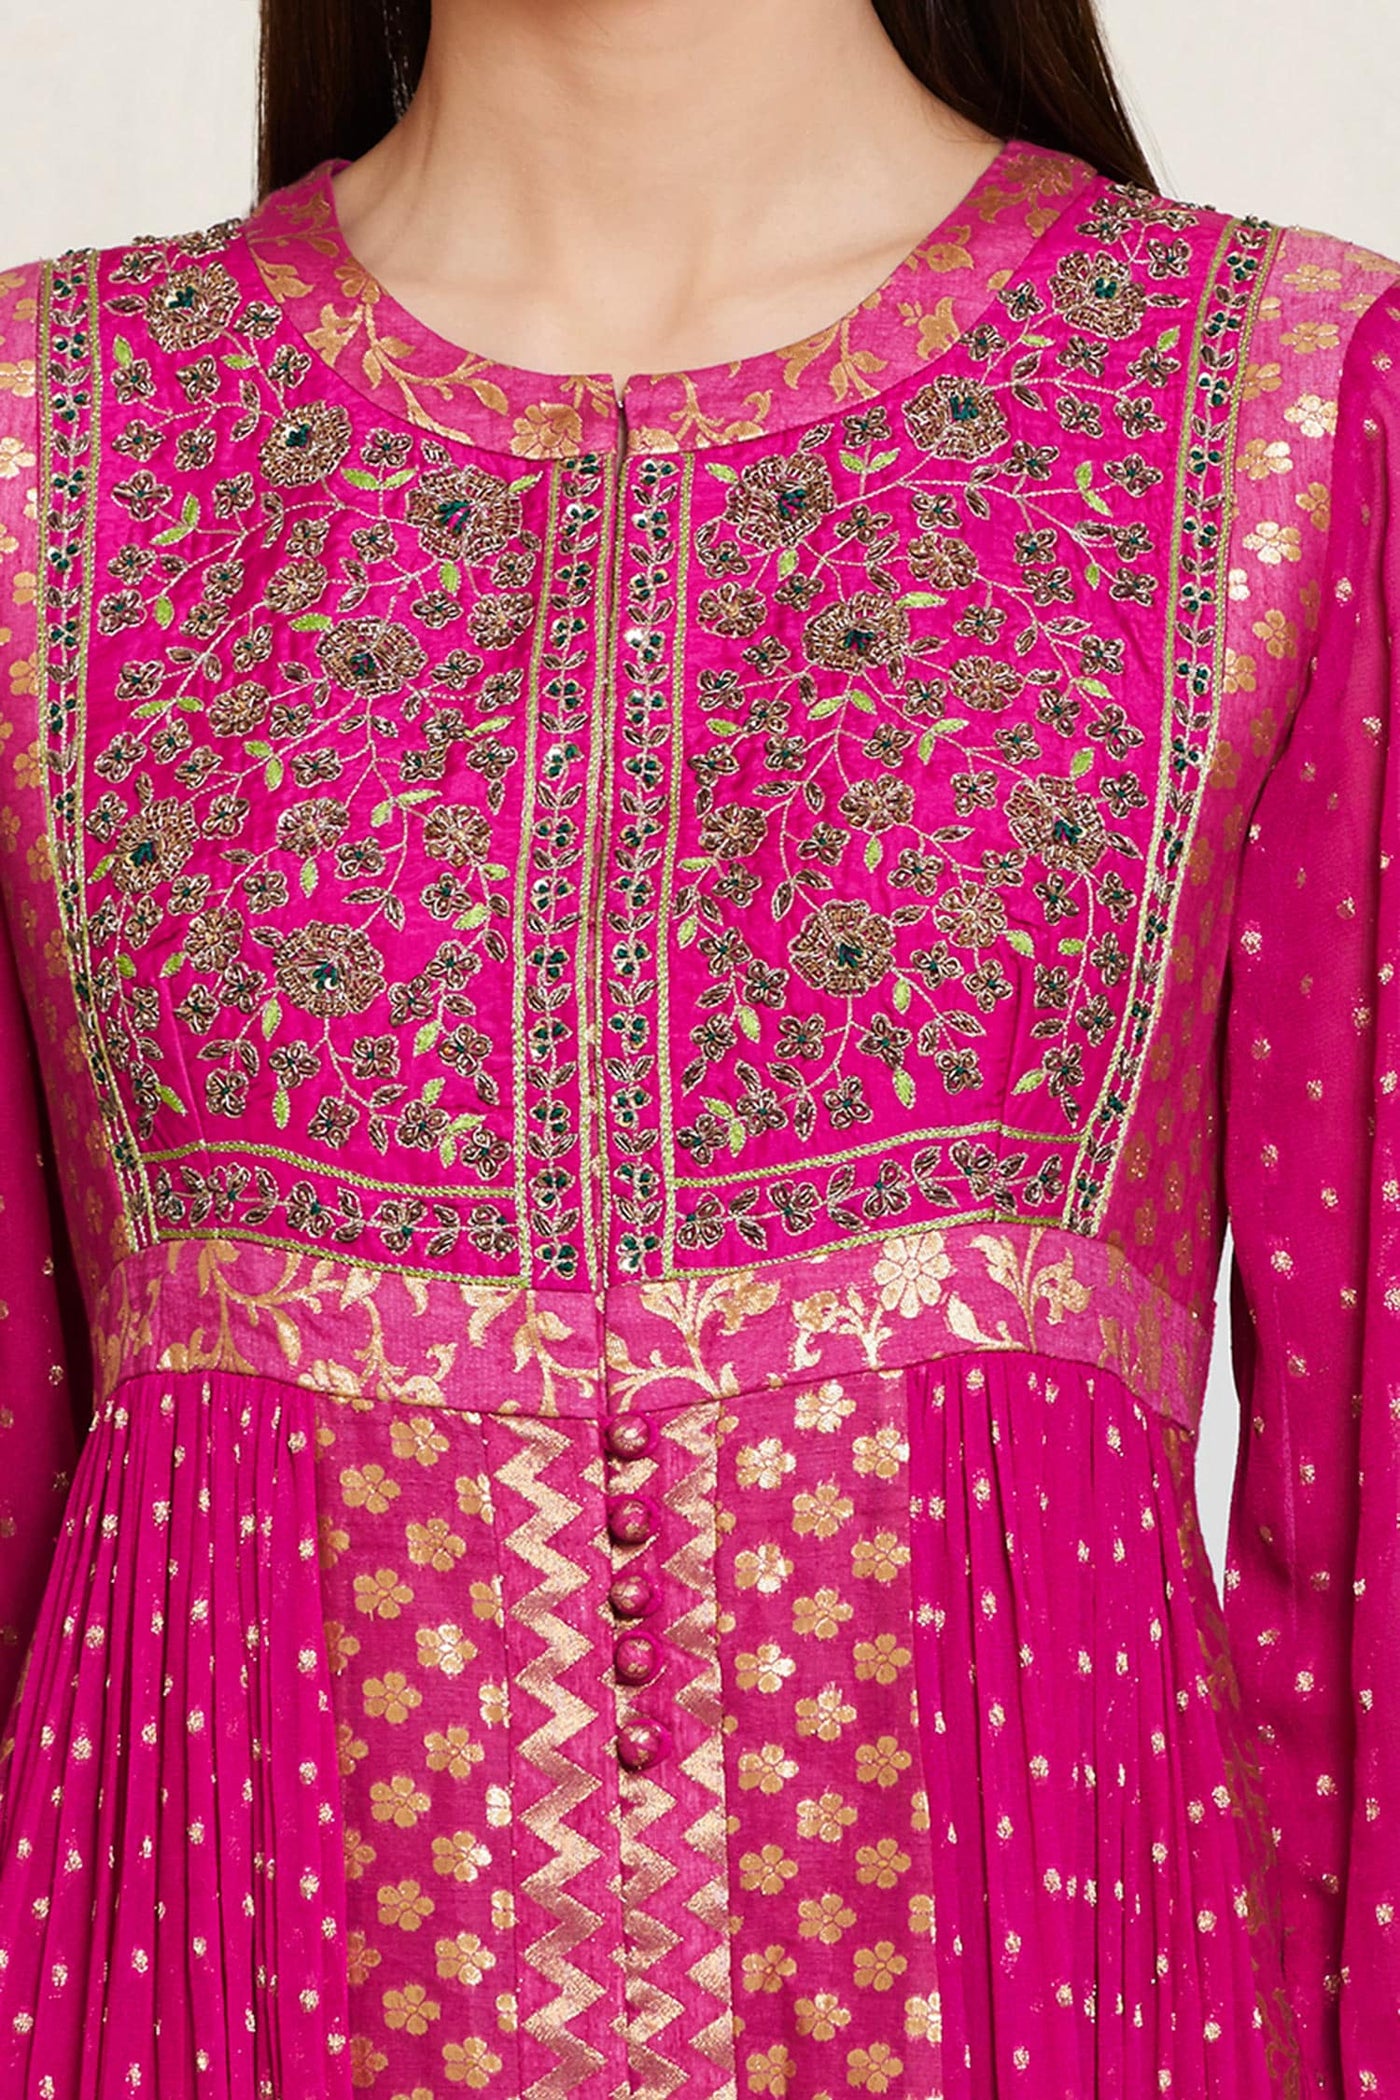 Pink Silk Anarkali Set - Indian Clothing in Denver, CO, Aurora, CO, Boulder, CO, Fort Collins, CO, Colorado Springs, CO, Parker, CO, Highlands Ranch, CO, Cherry Creek, CO, Centennial, CO, and Longmont, CO. Nationwide shipping USA - India Fashion X